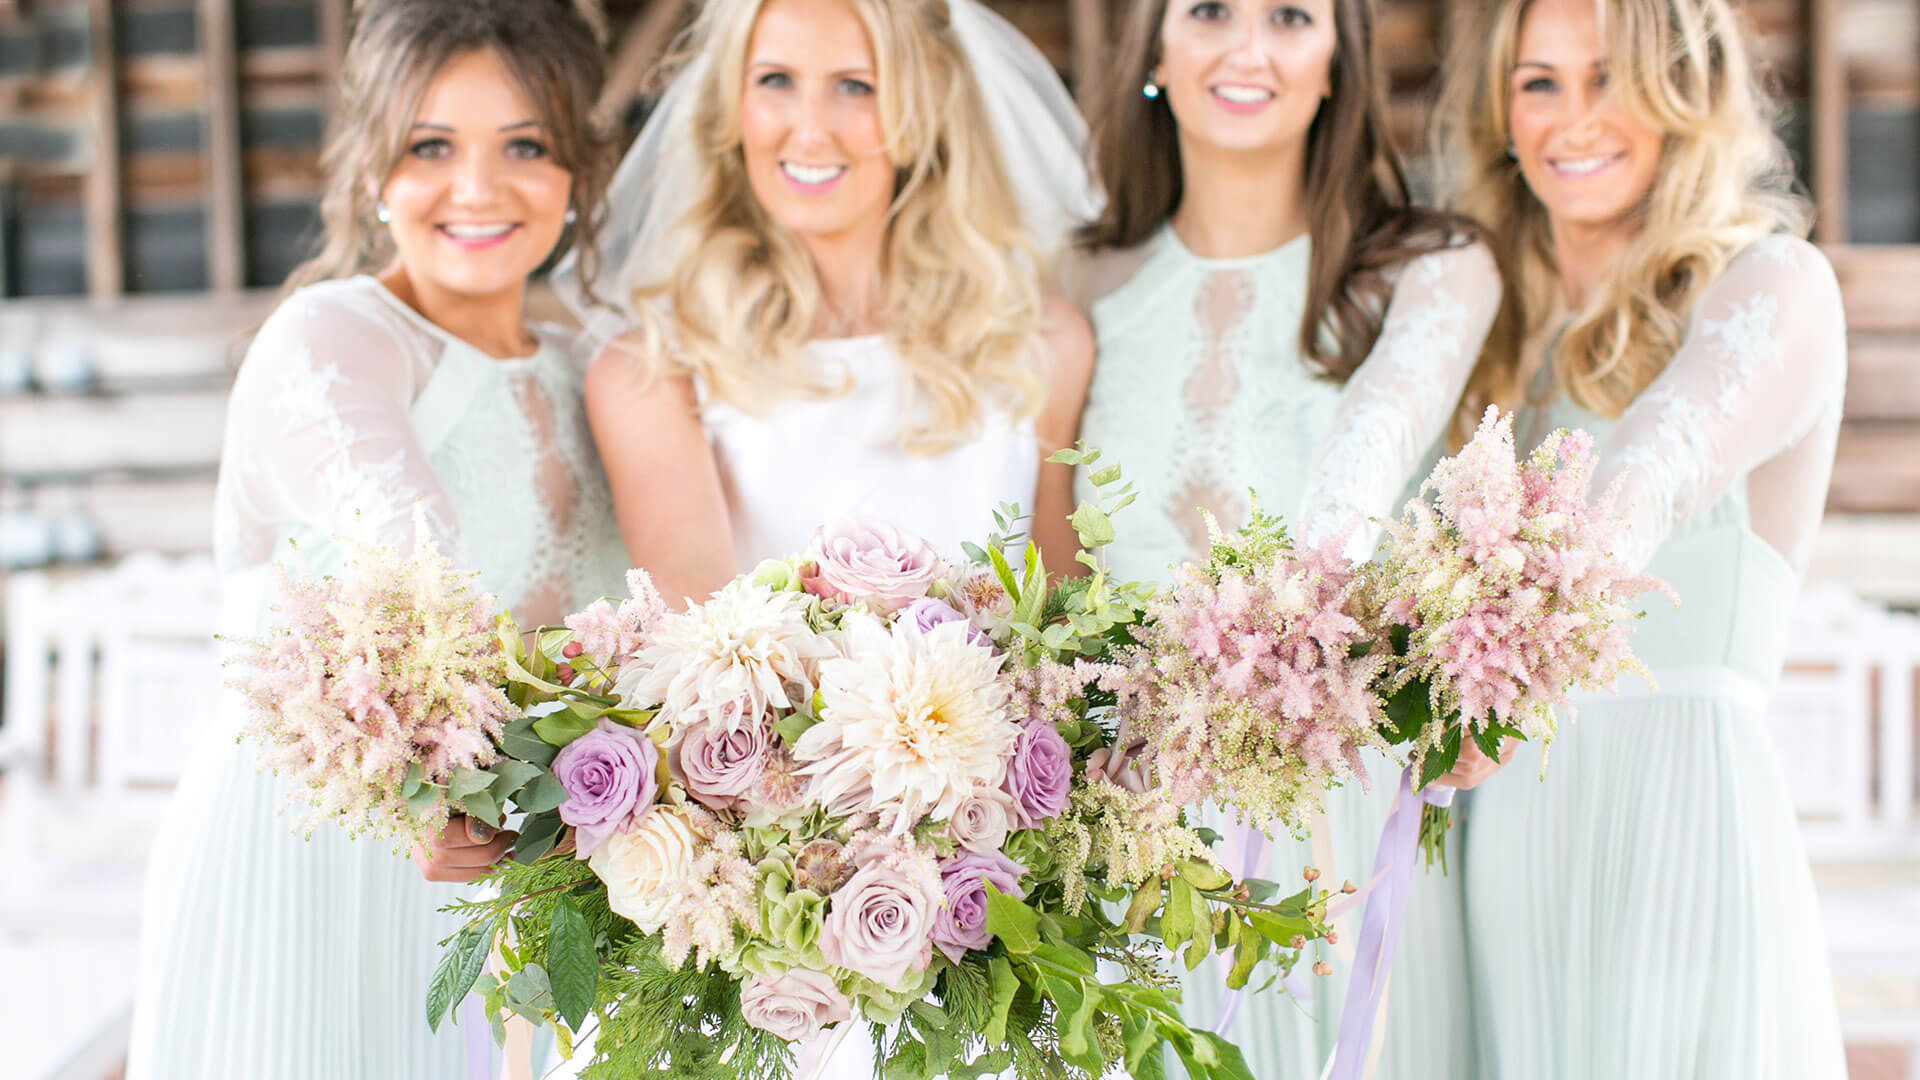 A bride and her bridesmaids stand in the Gather Barn holding their pale purple flowers - wedding ideas